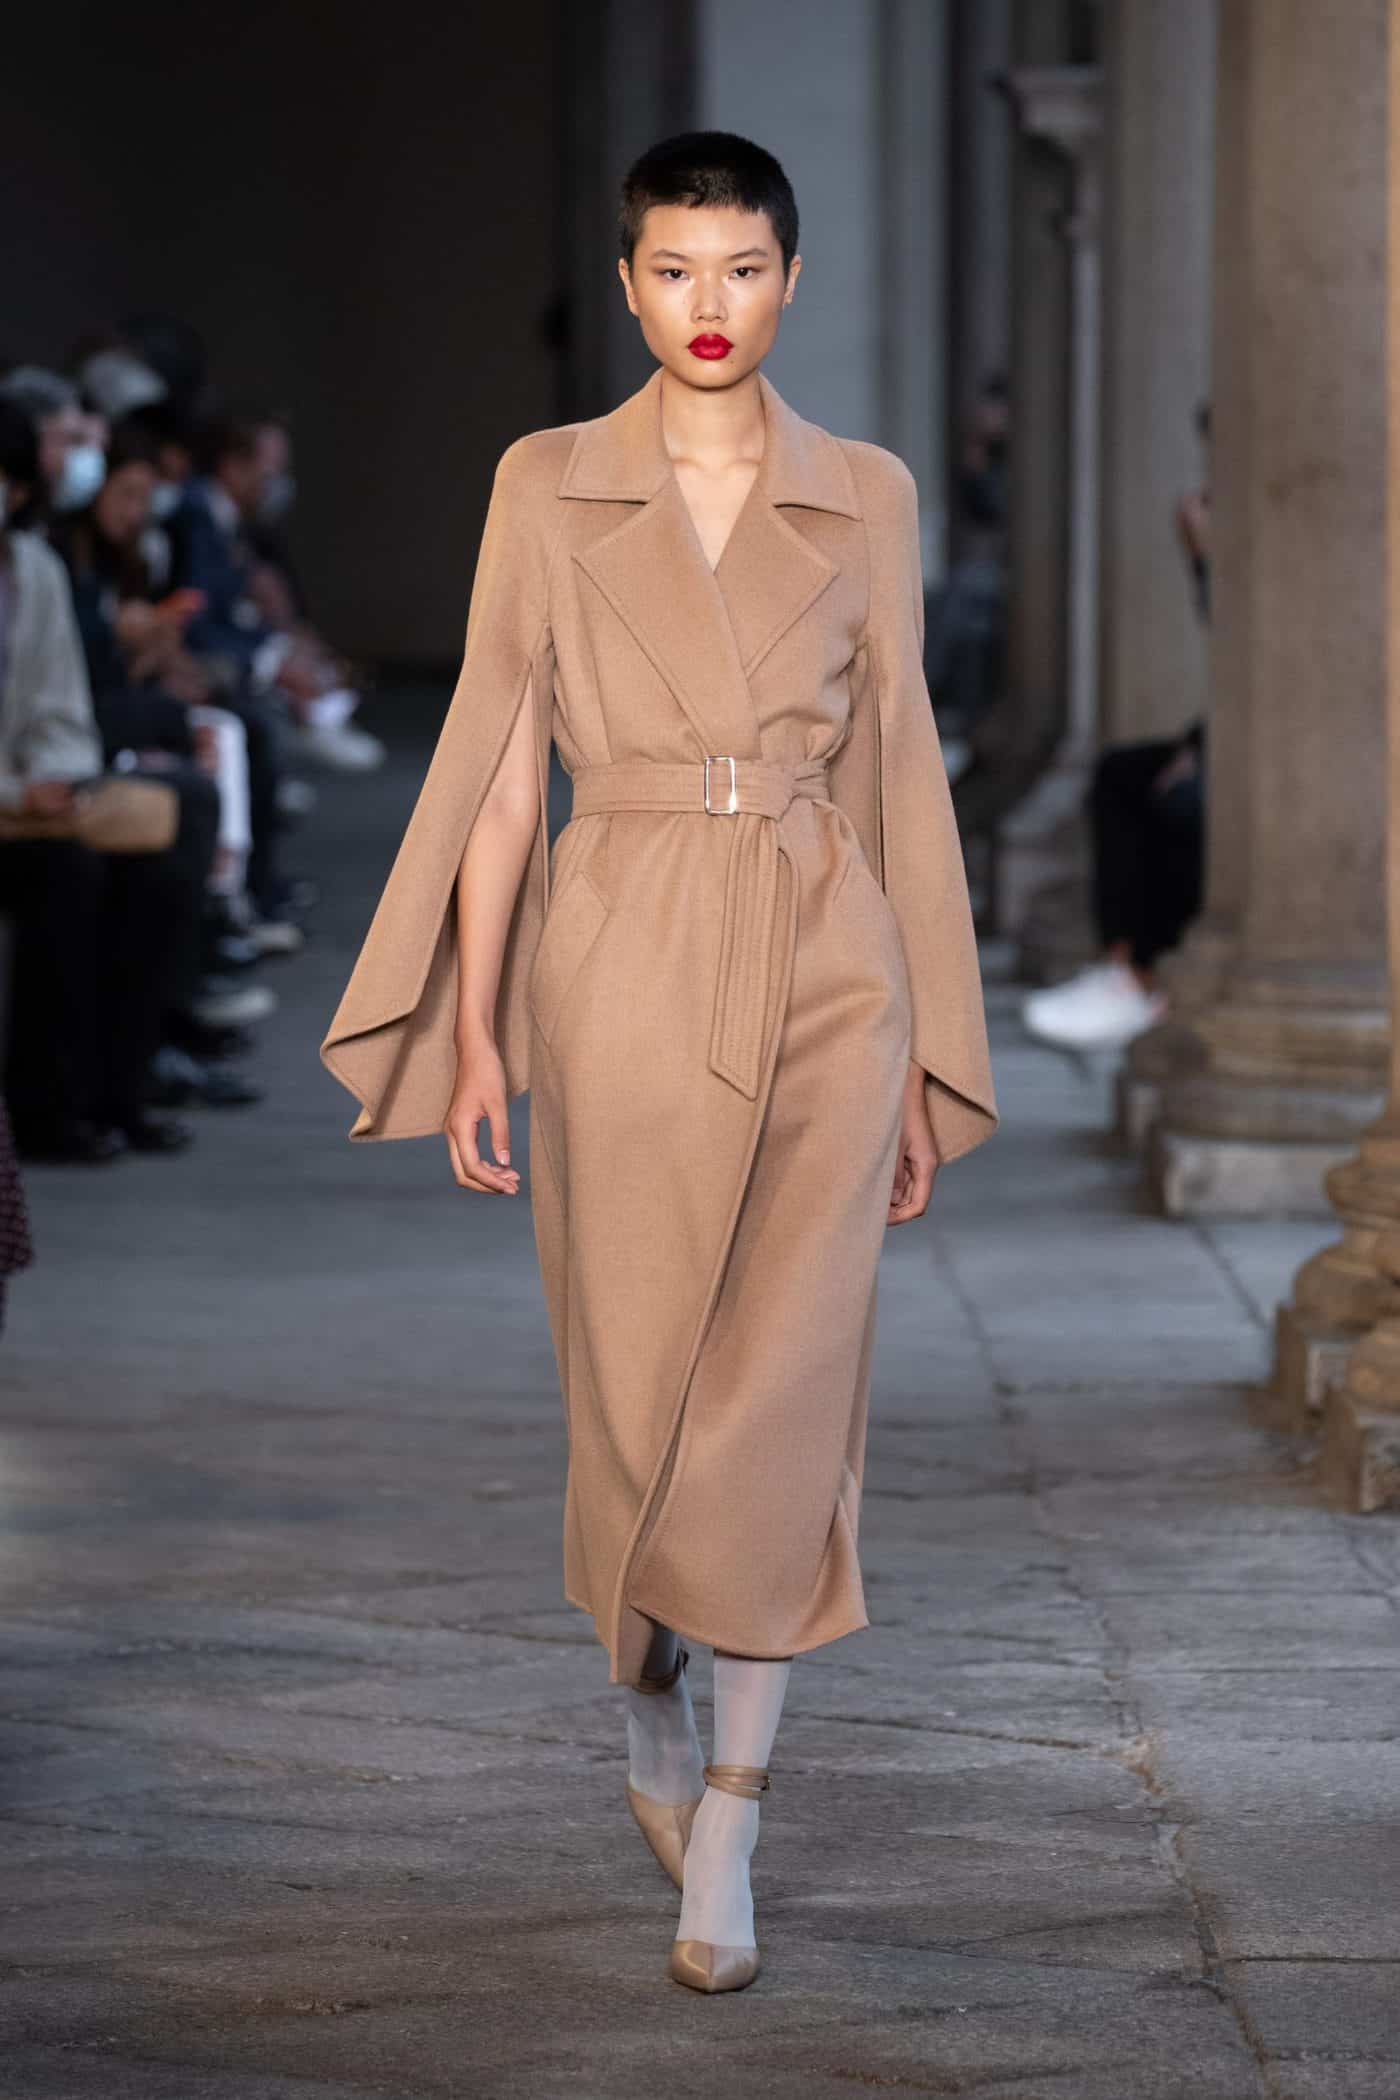 Max Mara Presents A Uniform For Women Ready To Rebuild The World - Daily  Front Row